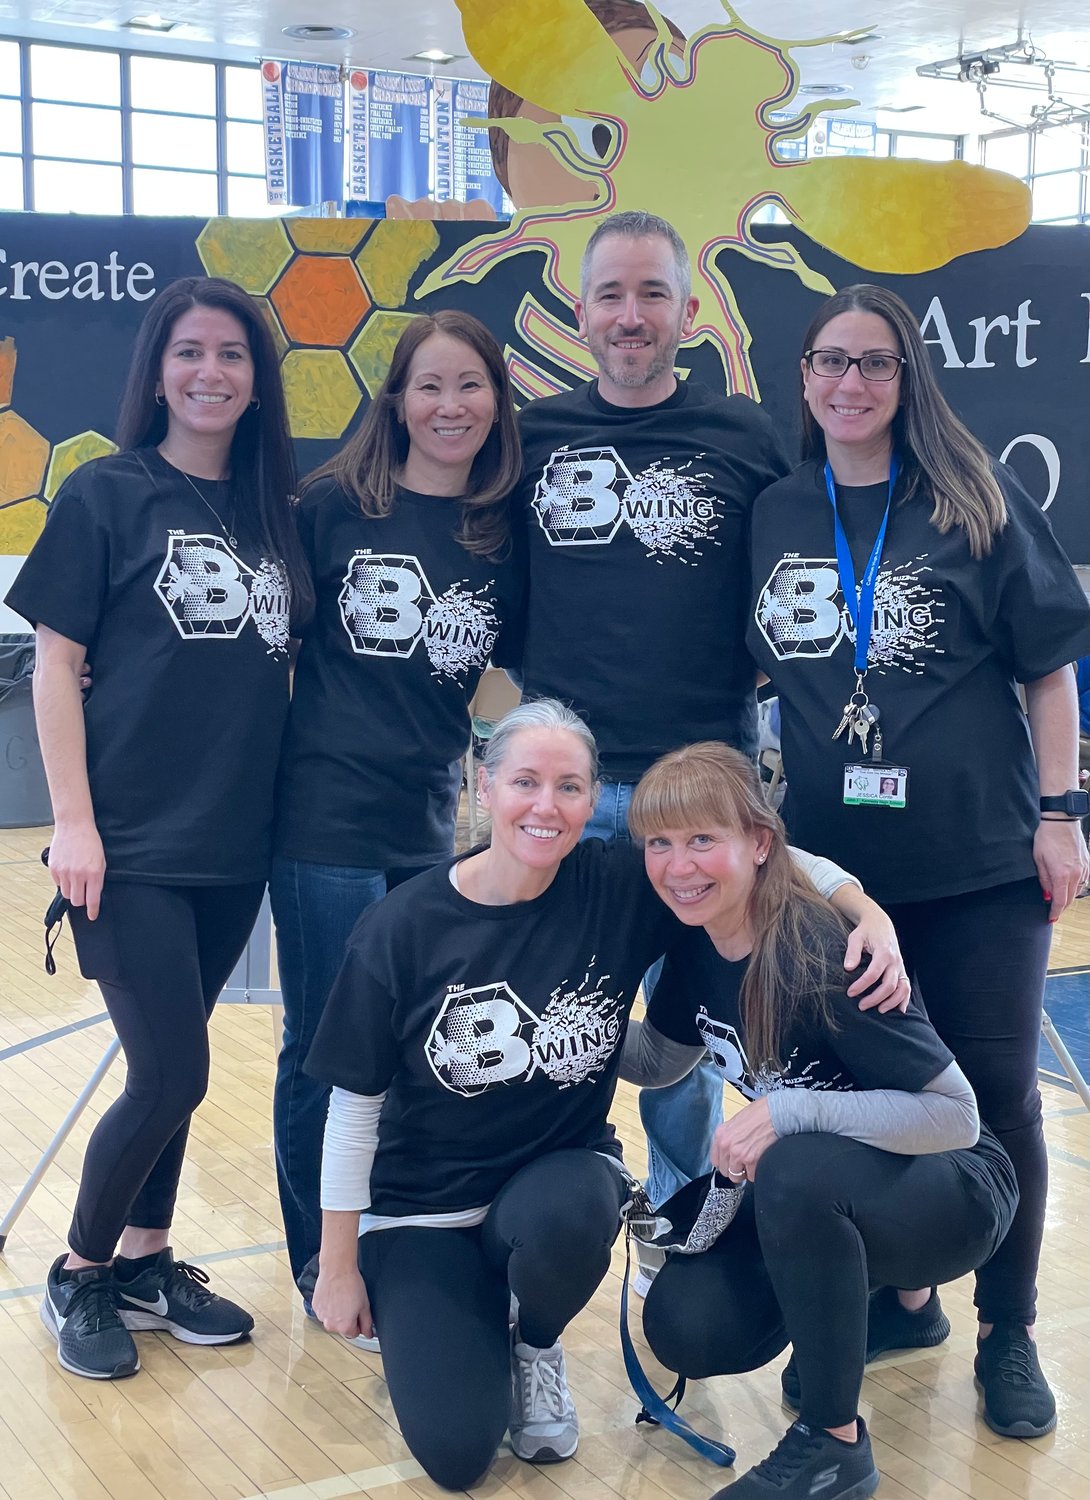 Calhoun art teachers Heather Lohr, Linda Seckler, Michael Goldberg and Jessica Conte, top, and Nancy Scott and Joan Gonzalez, bottom, helped students produce the dozens of projects on display in Calhoun’s gym.